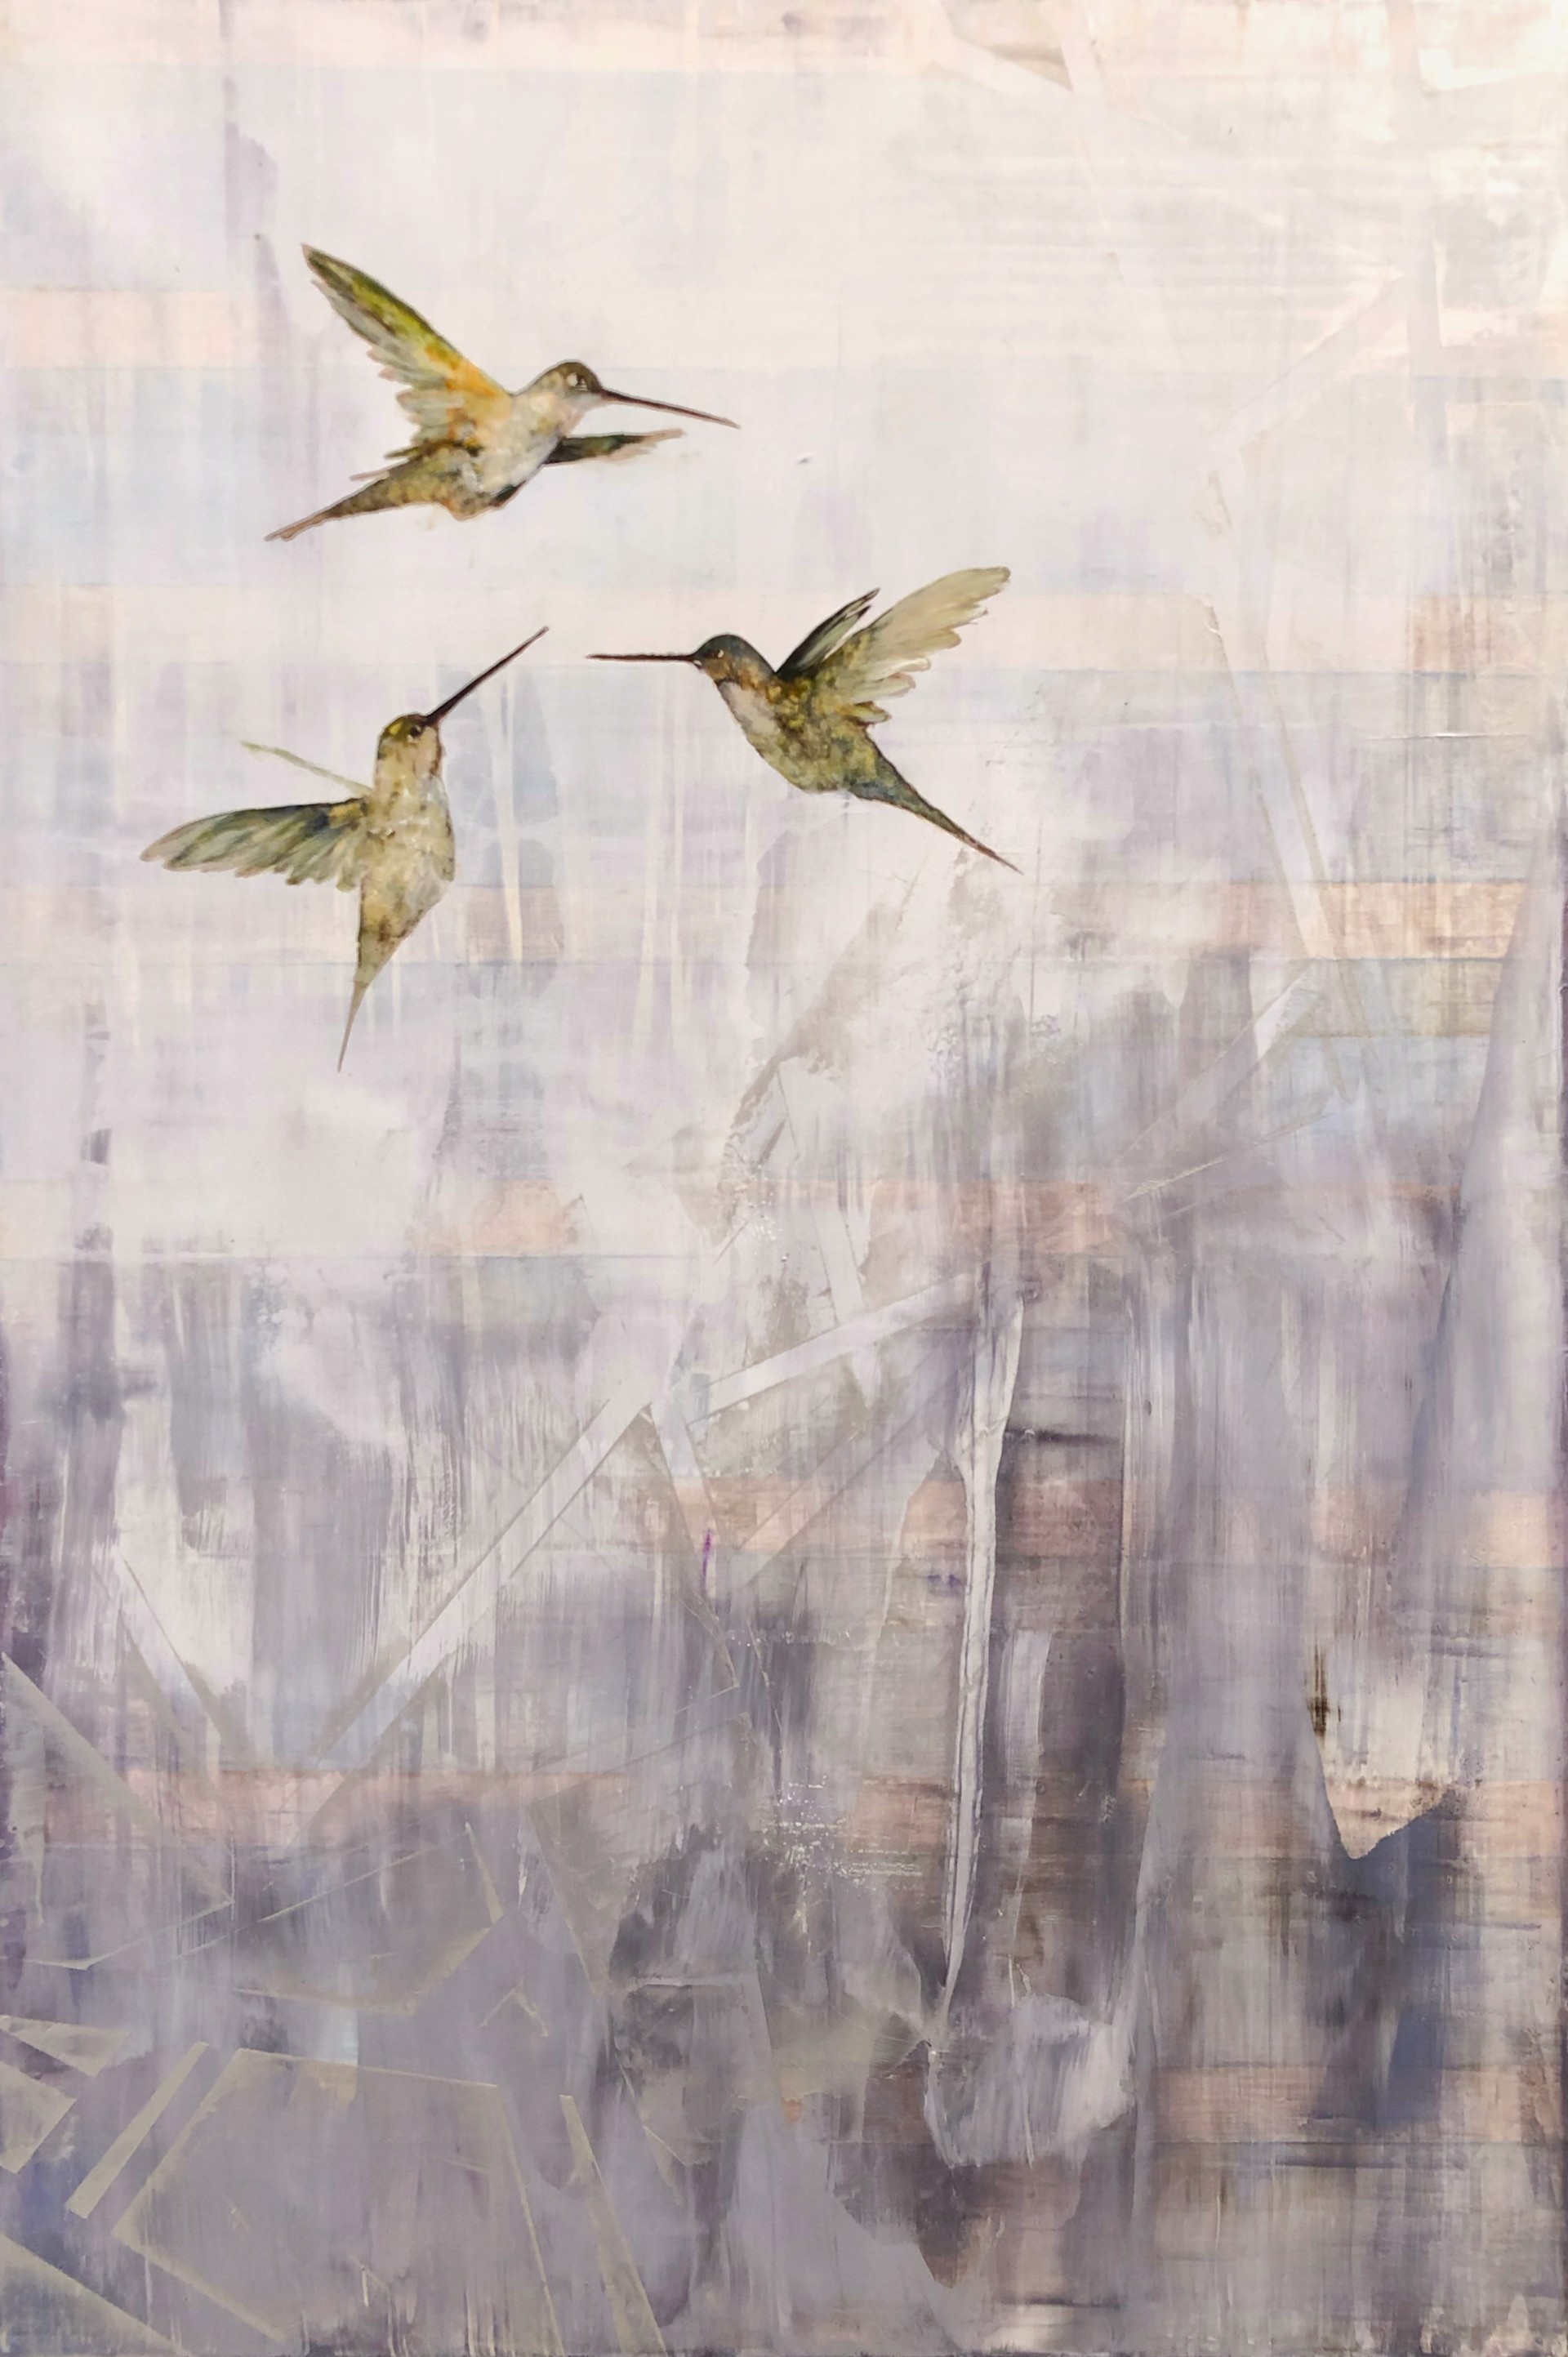 Original Oil Painting Of Three Humming Birds In Flight On a Light Grey Contemporary Background With Faint Geometrical Shapes, By Jenna Von Benedikt